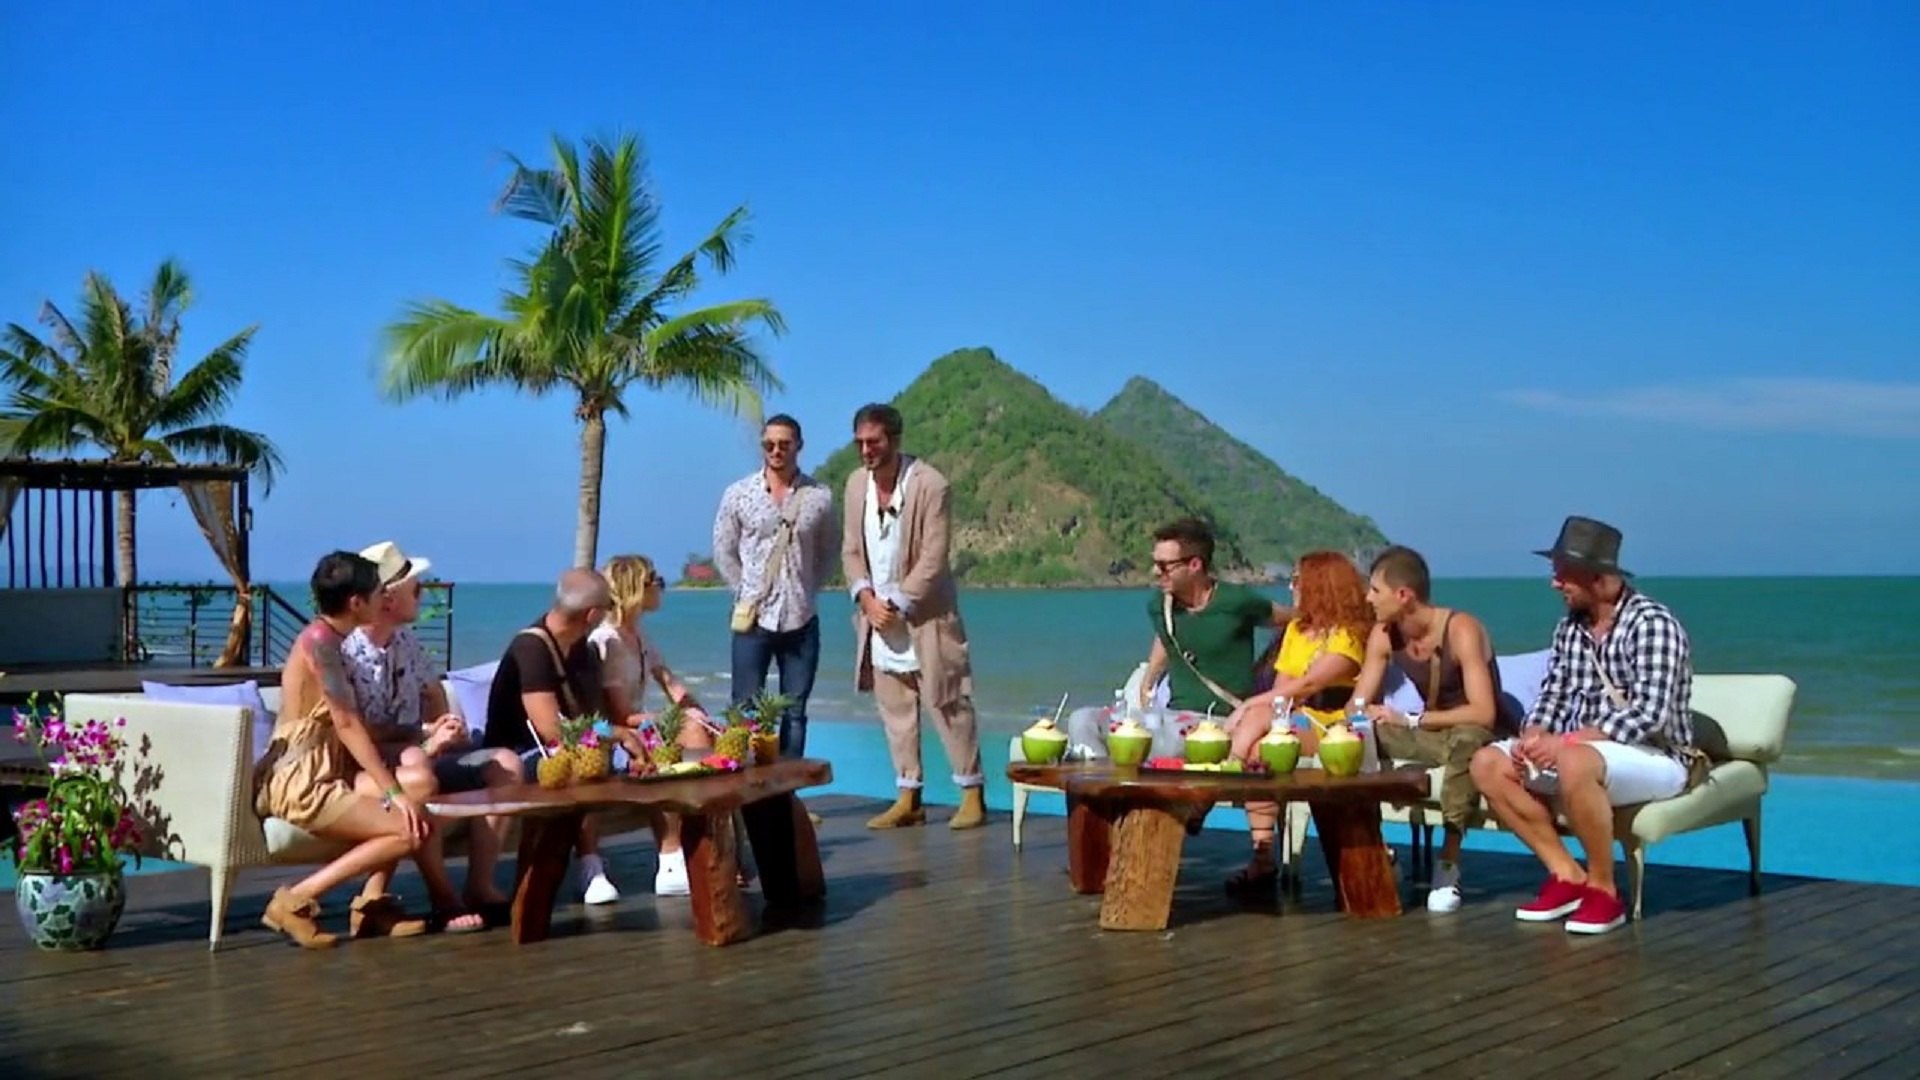 Temptation Island (RO) countdown - how many days until the next episode.